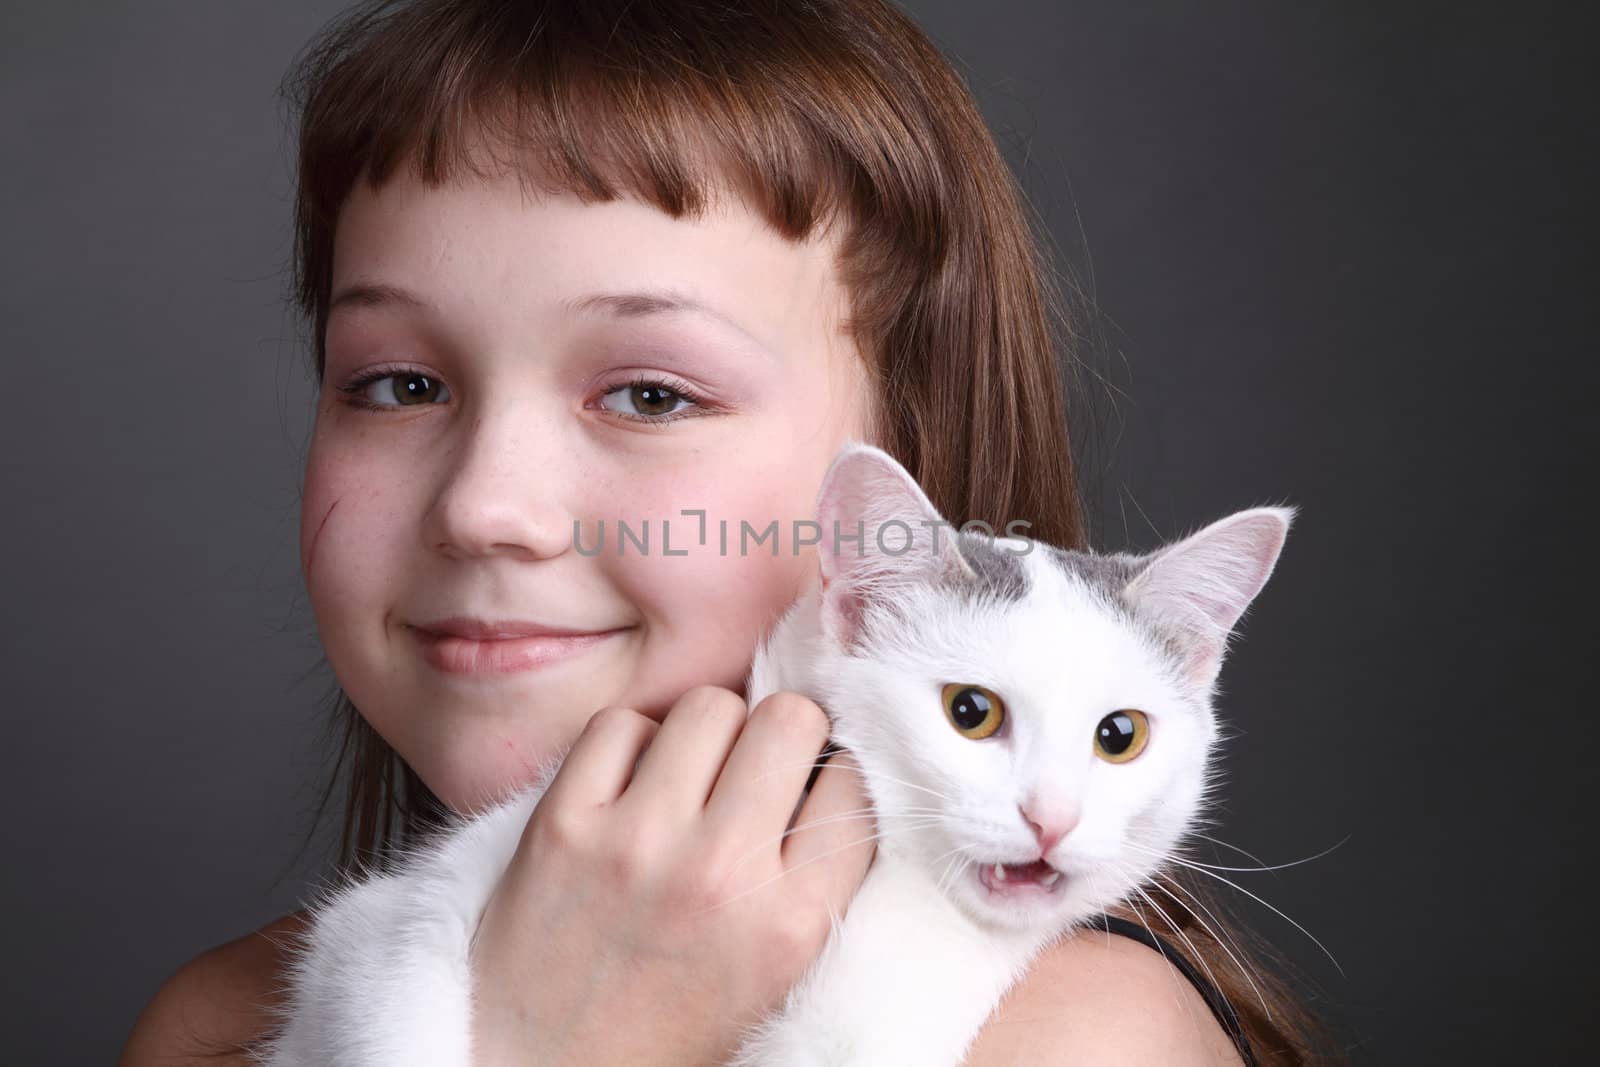 the girl and white cat play. close up. double 8